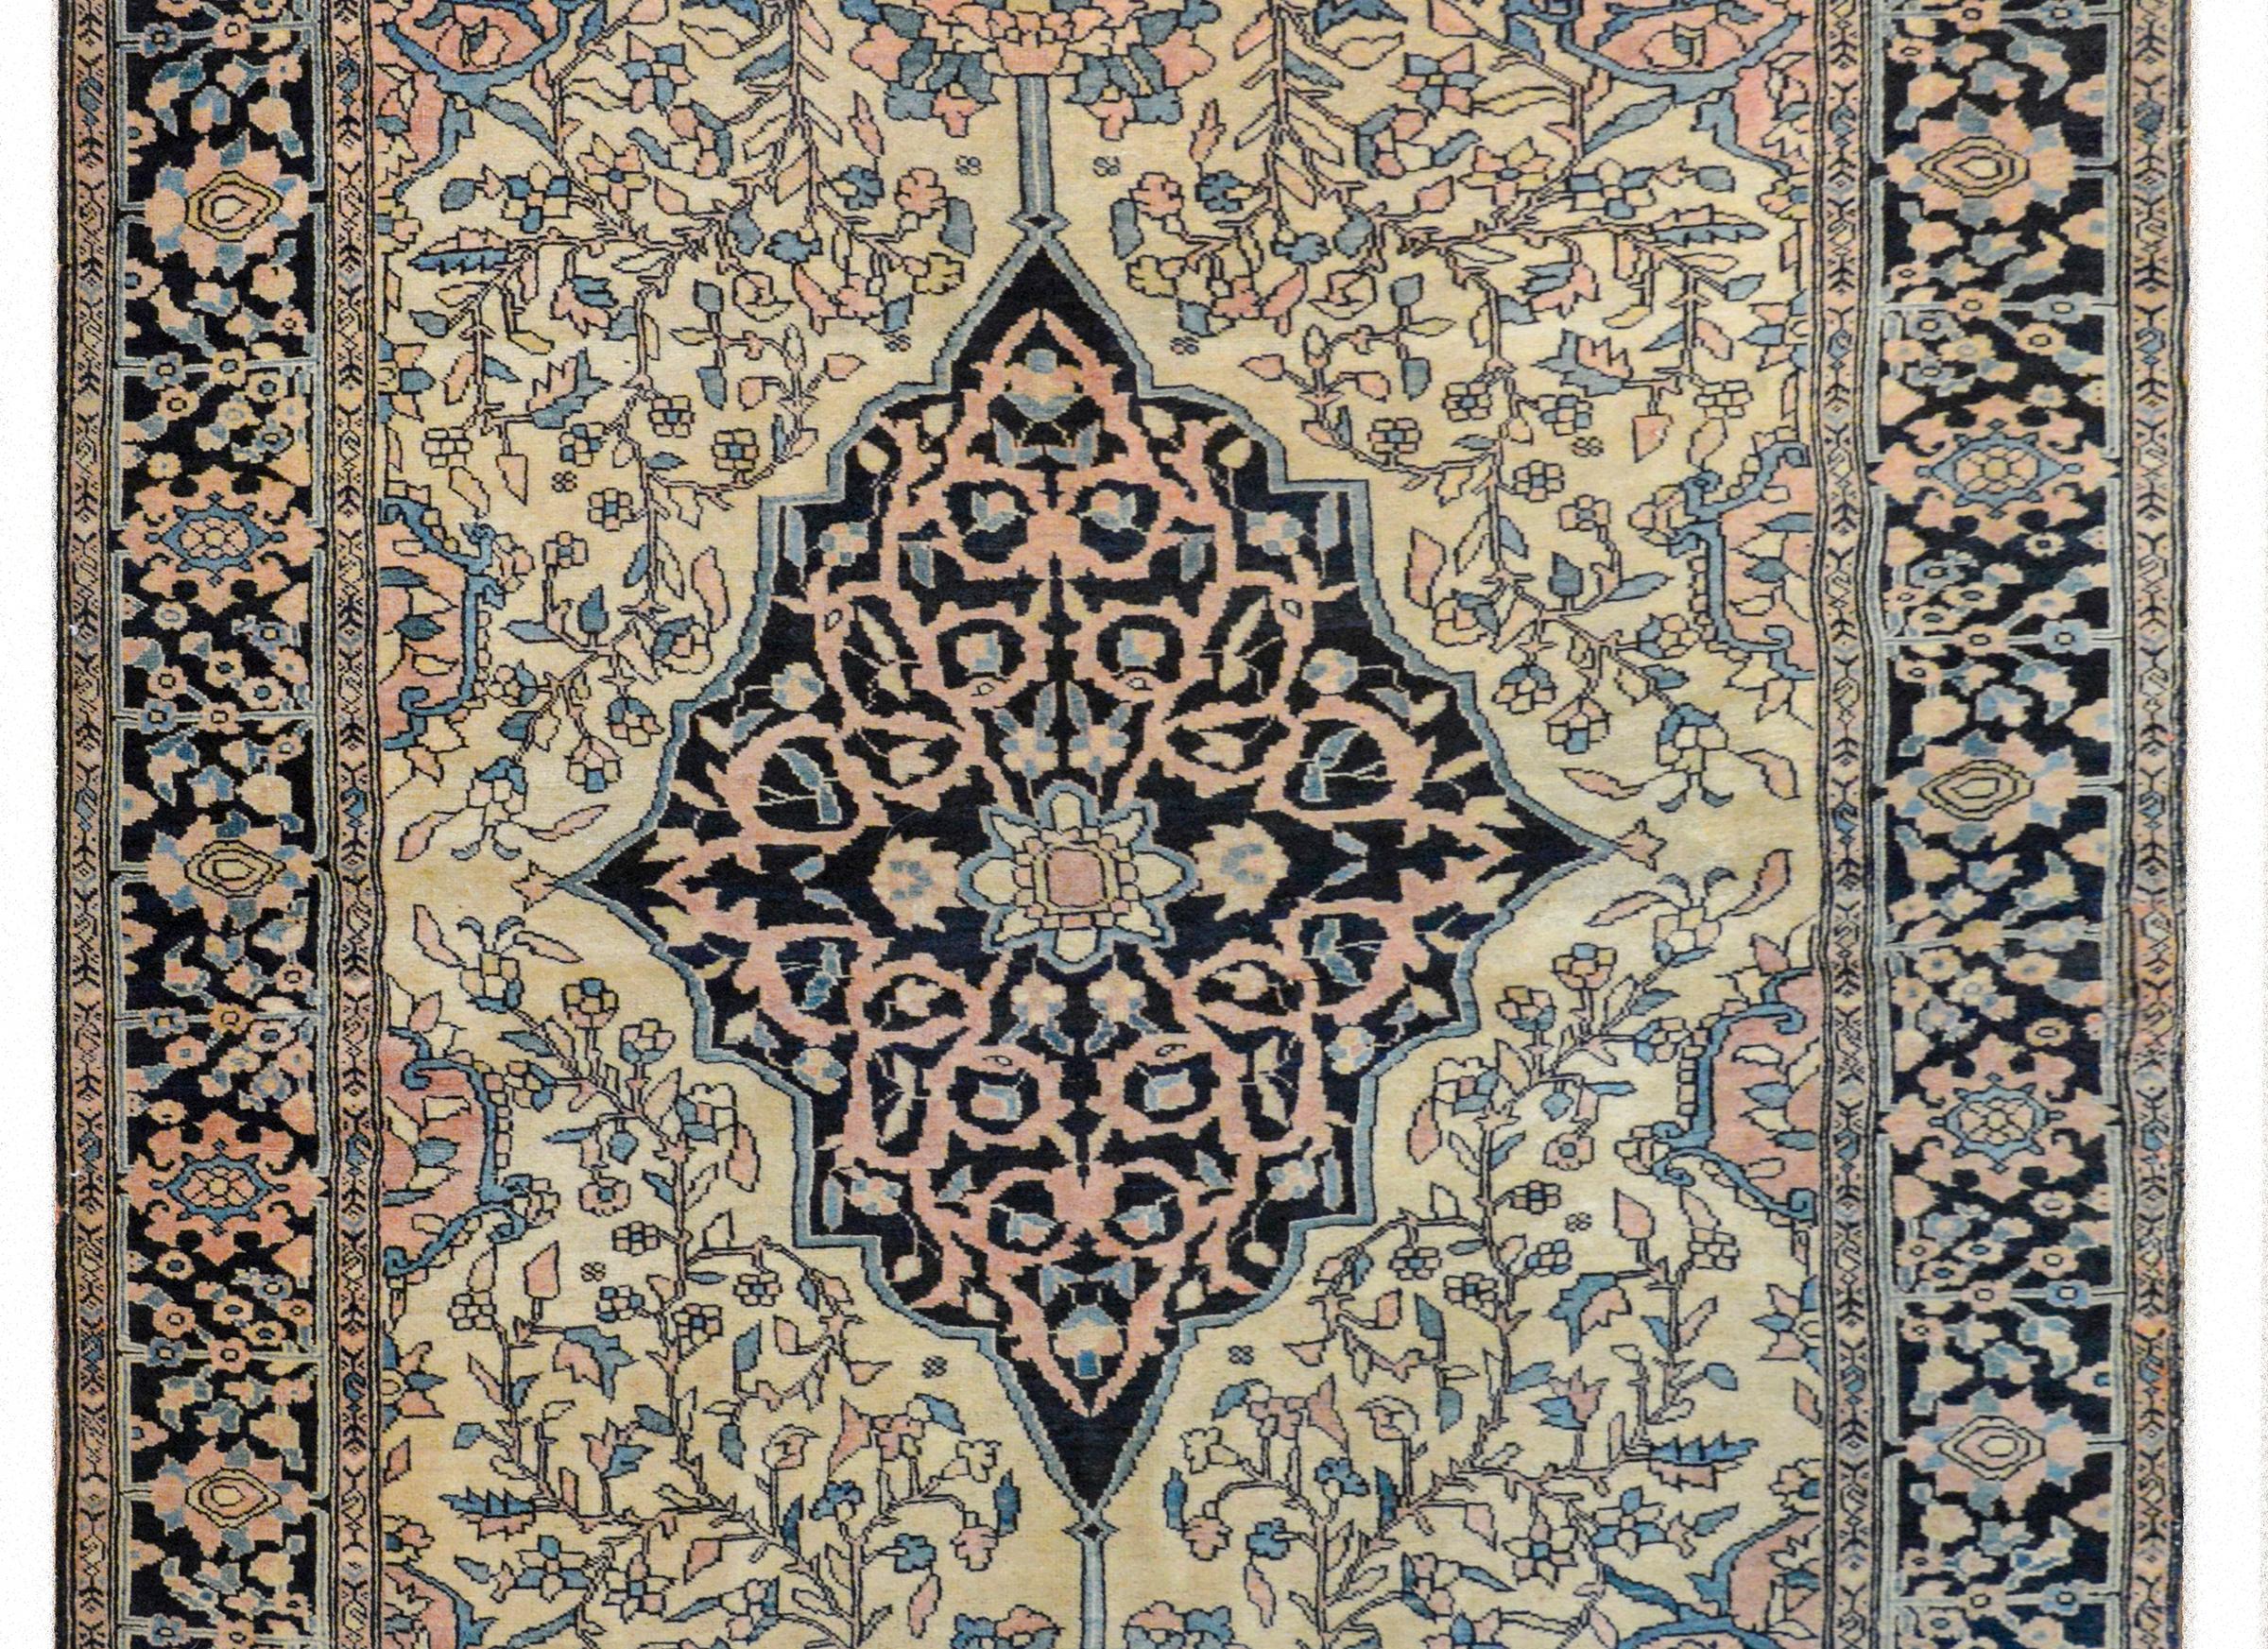 A beautiful early 20th century Persian Sarouk rug with a large central diamond medallion with a pink, gold and light indigo scrolling vine pattern against a dark indigo background, and sitting amidst a pale gold field of more scrolling vines, and